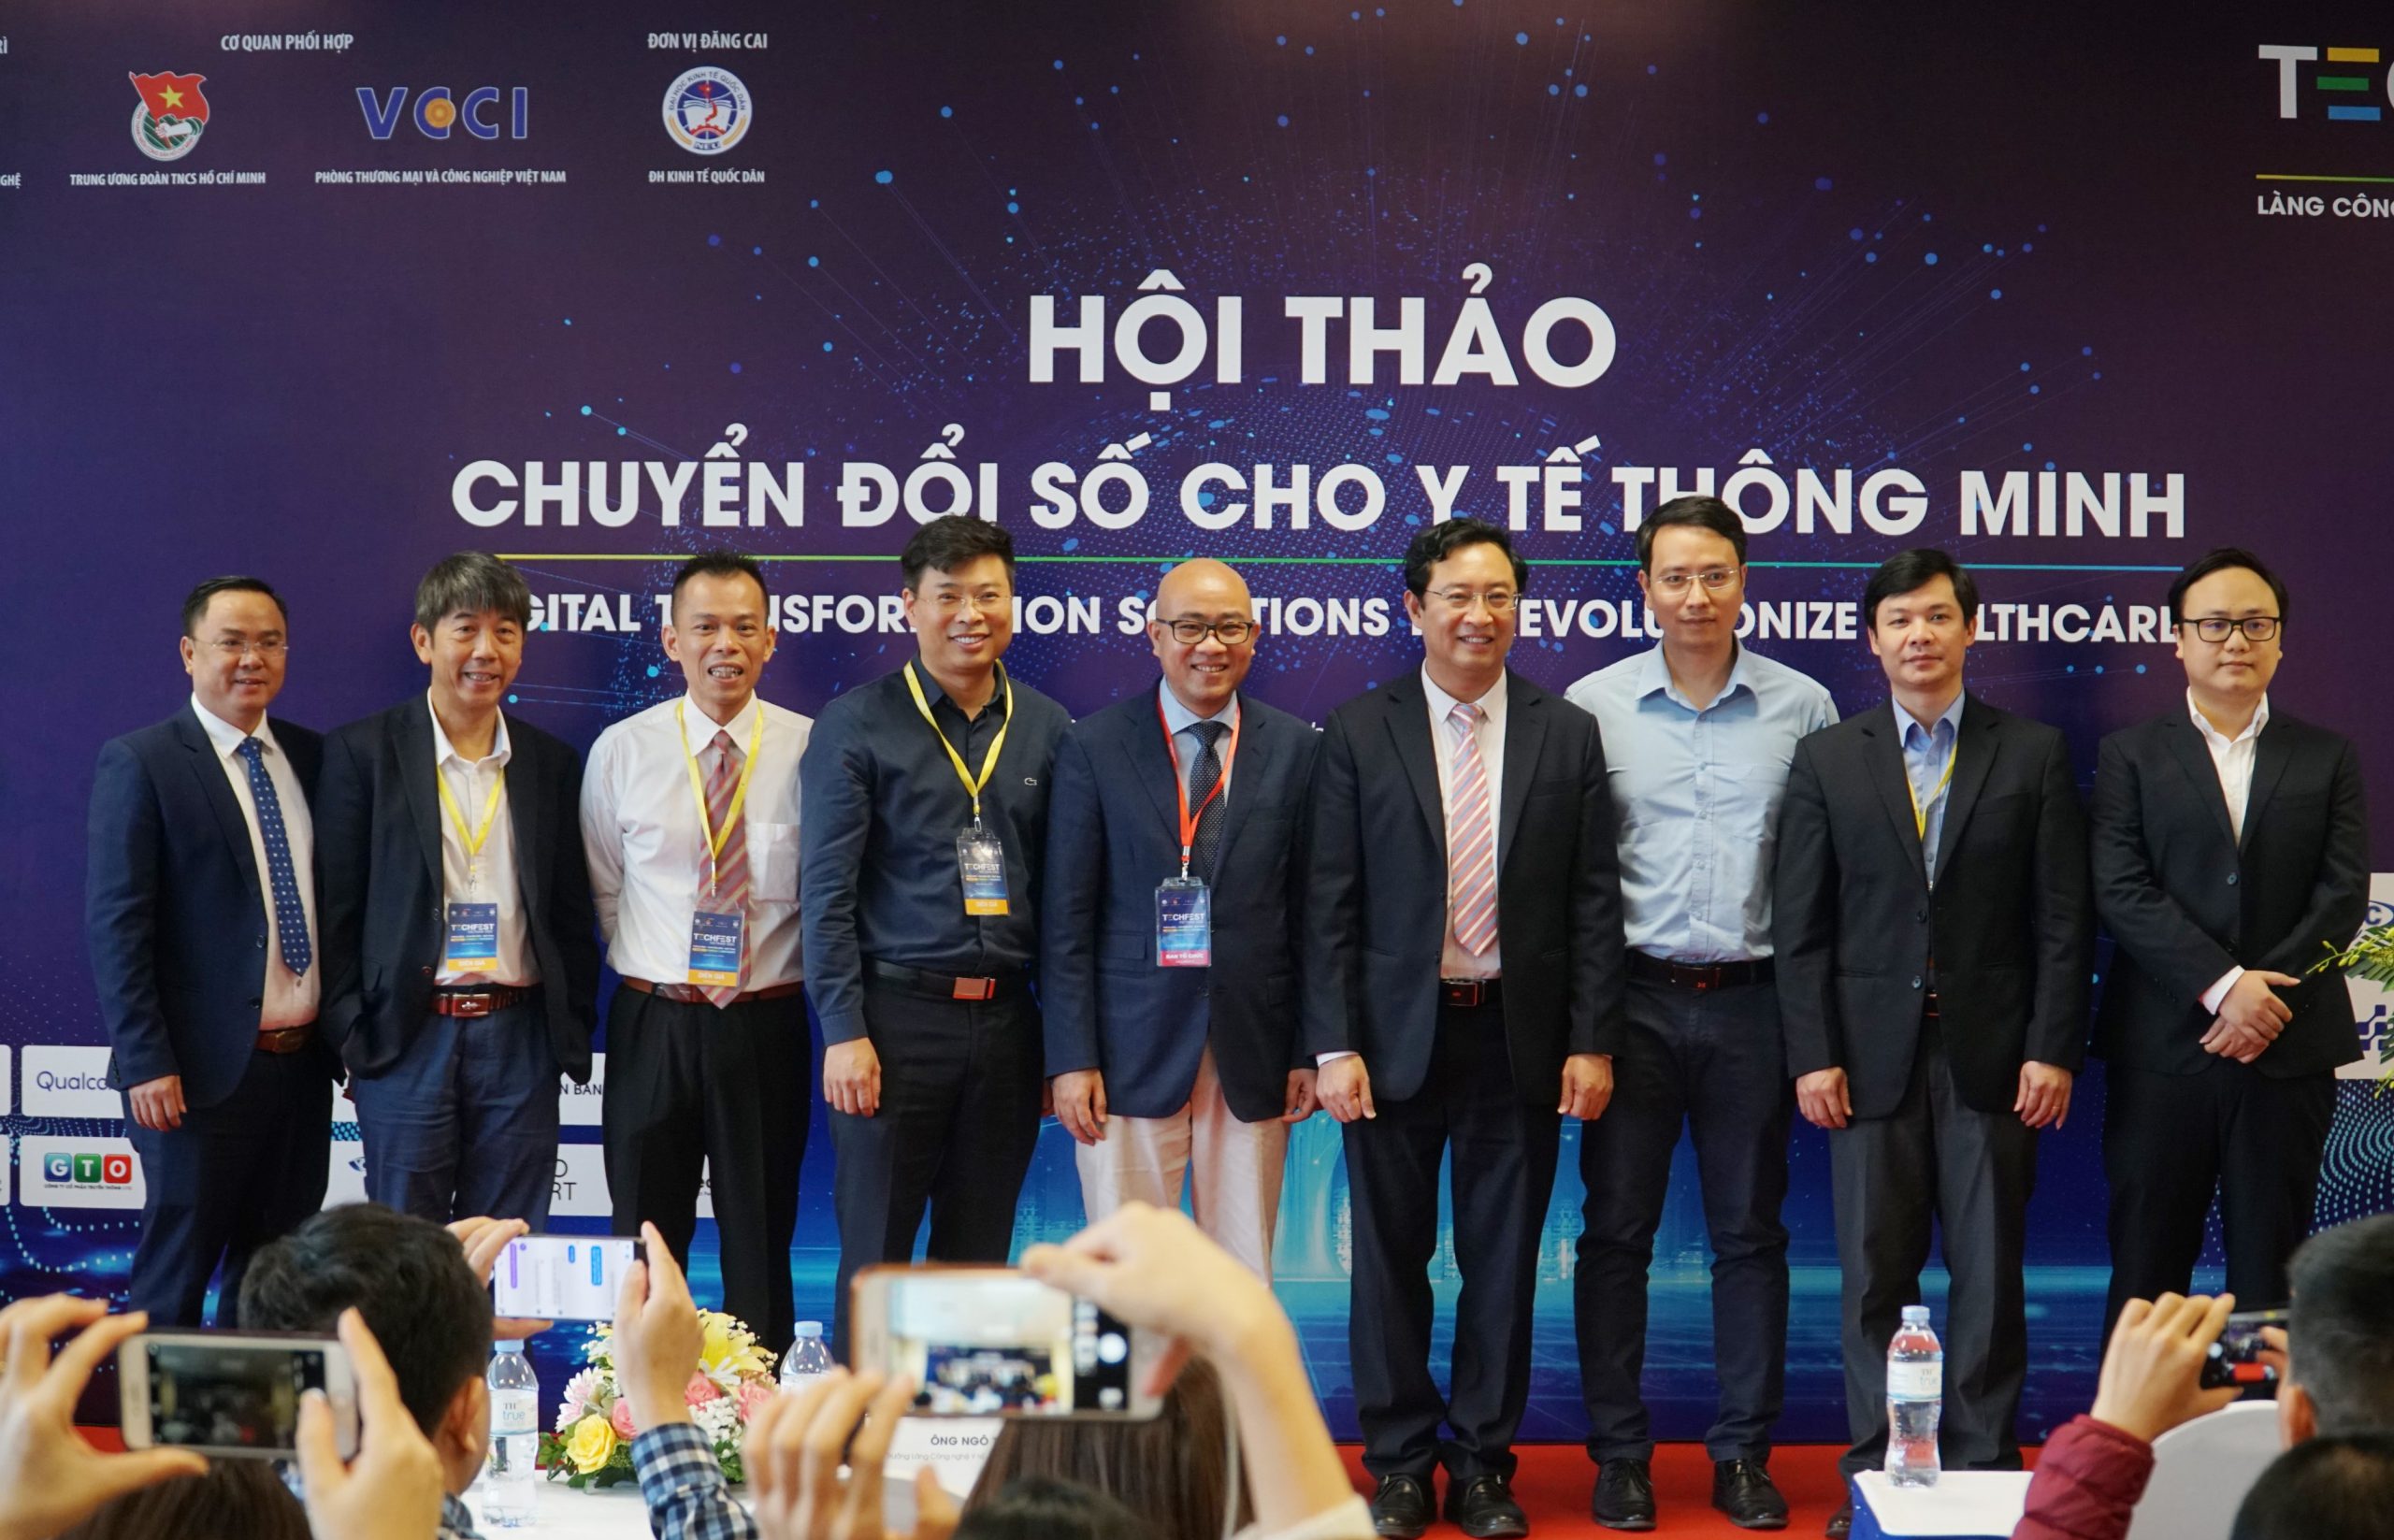 VMED Group and role of head of medtech village in techfest vietnam